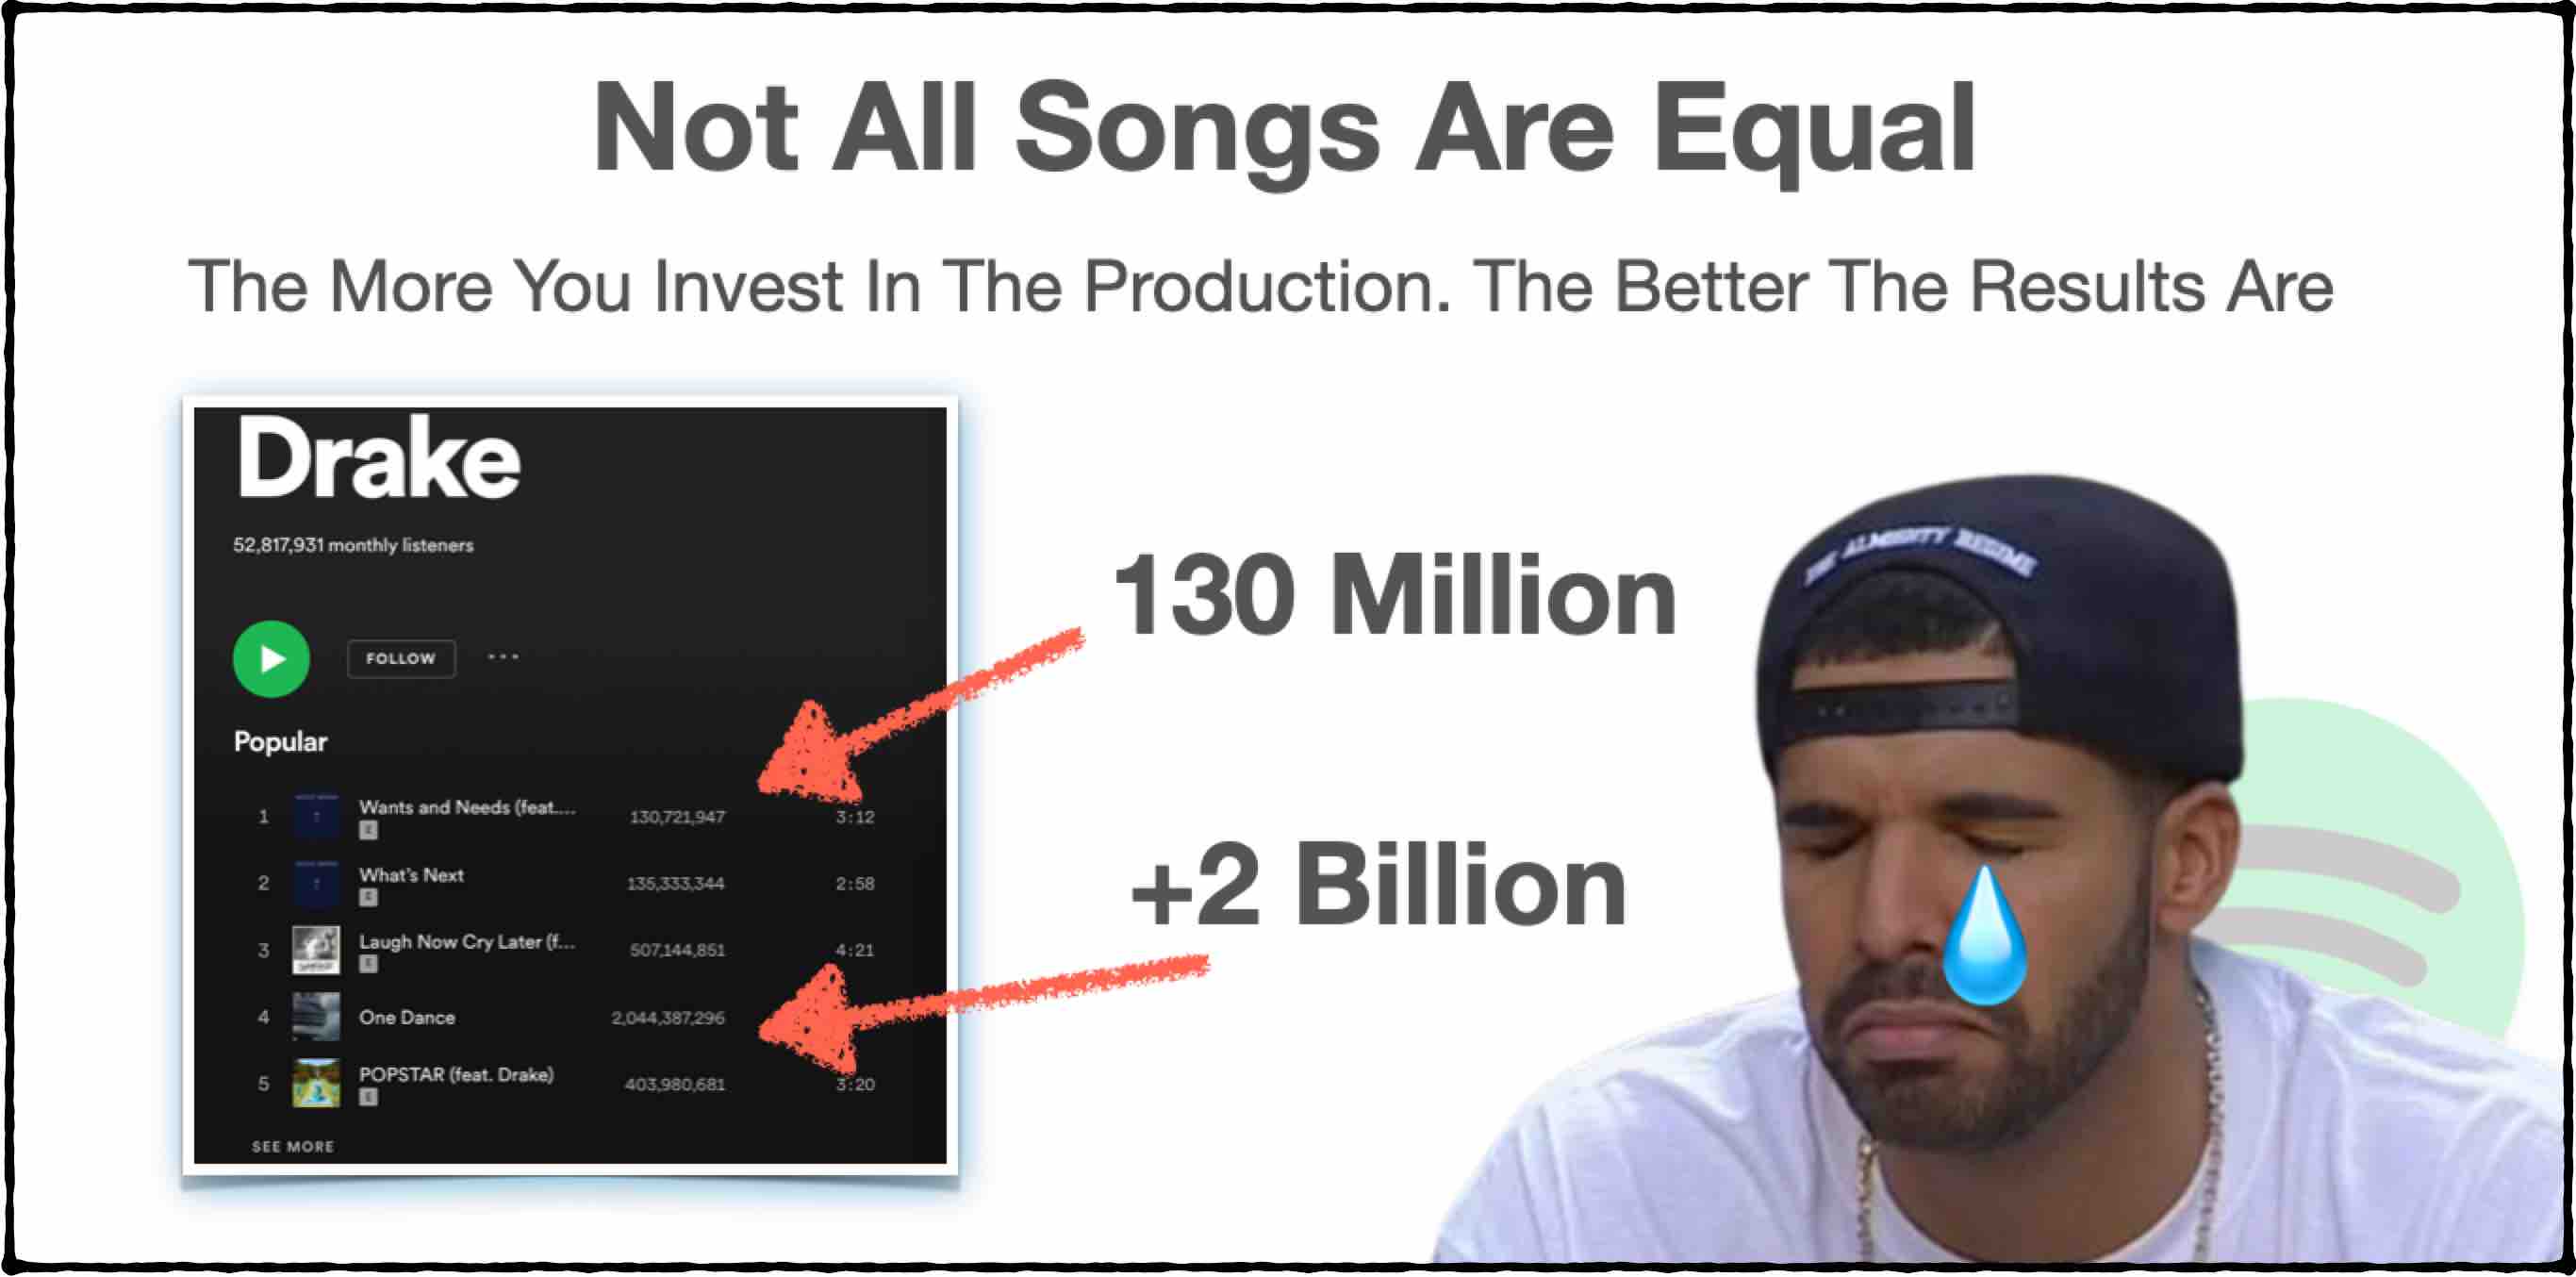 Not all songs are equal